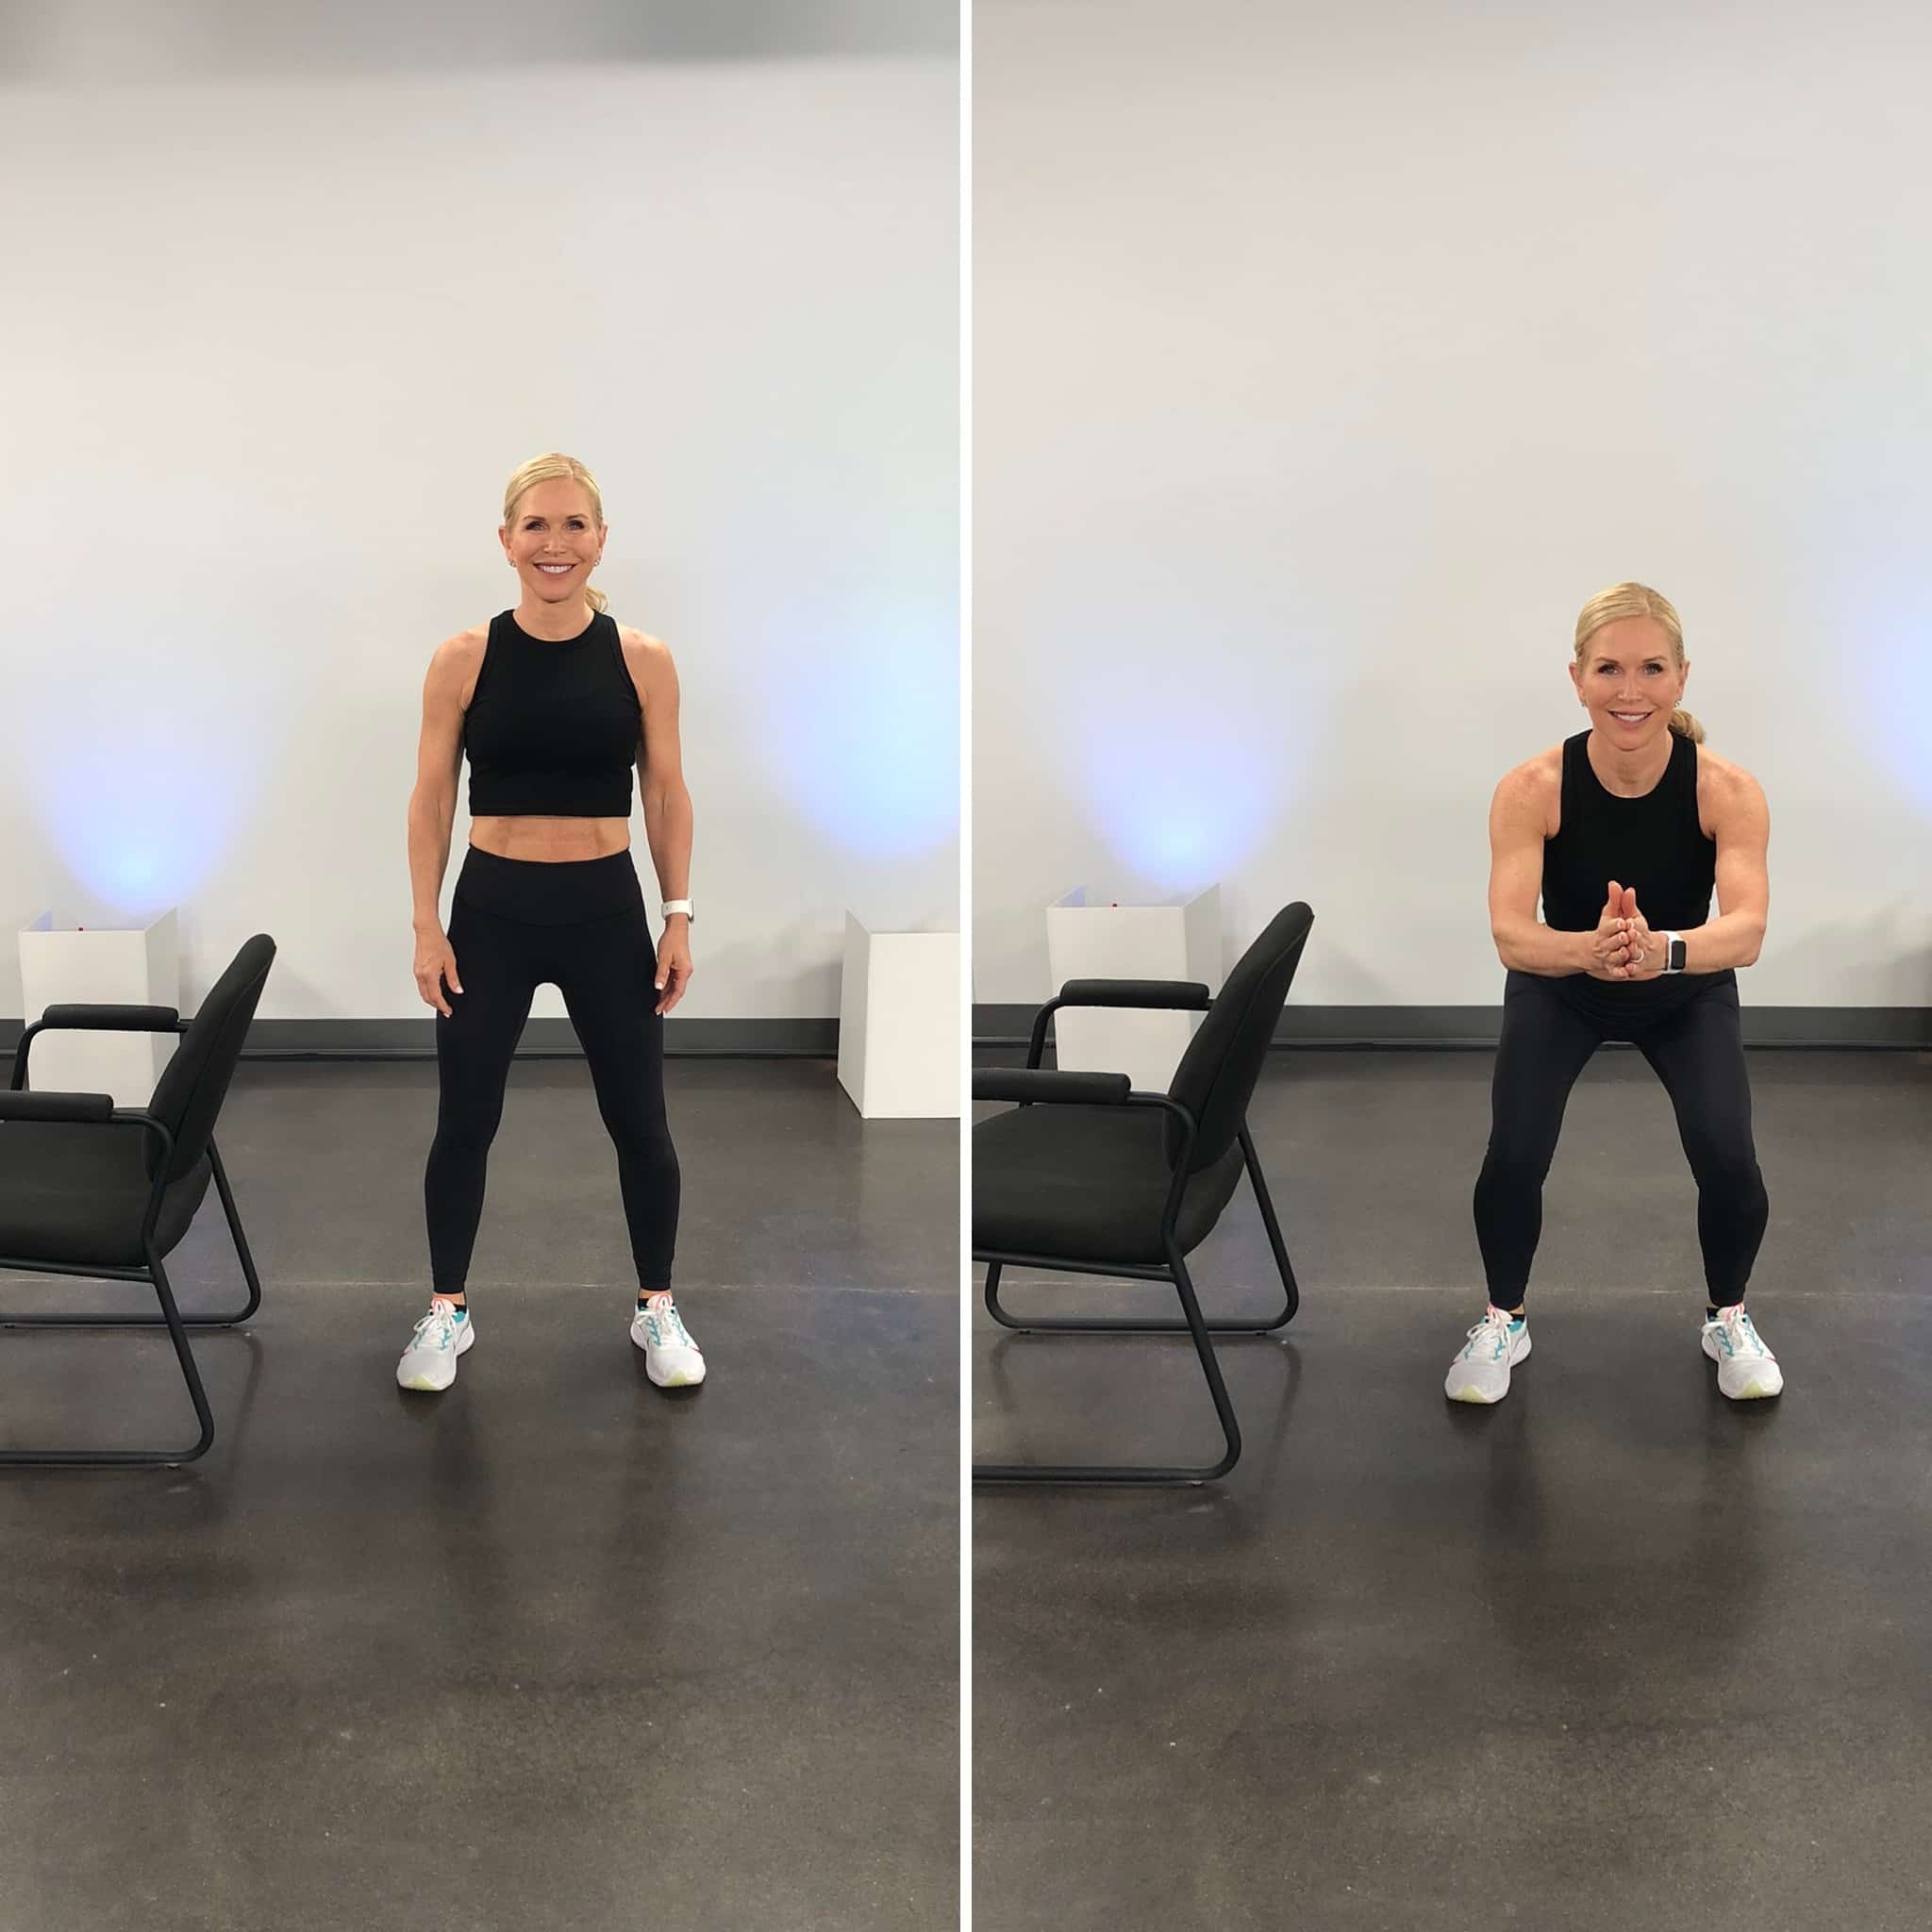 Chris Freytag standing and doing an air squat with a chair next to her to improve balance